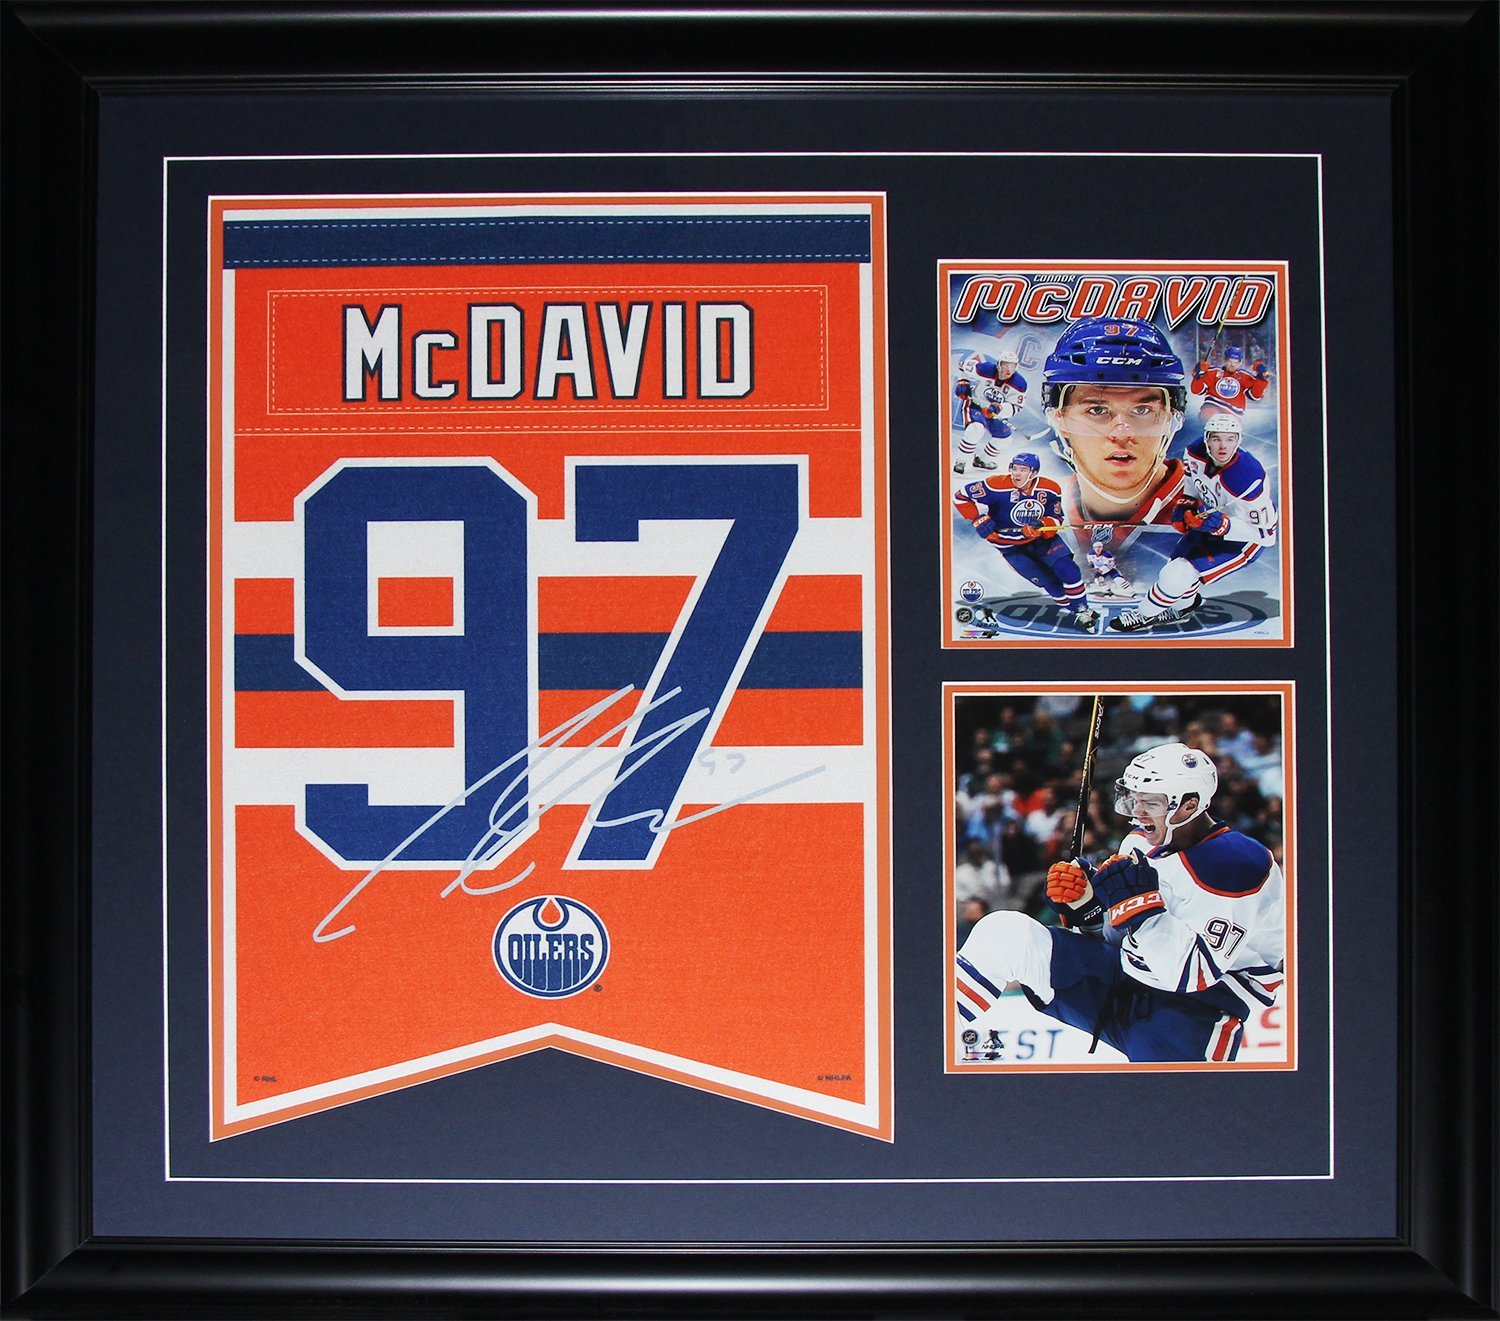 Sold at Auction: AUTHENTIC AUTOGRAPHED CONNOR MCDAVID #97 EDMONTON OILERS  AWAY JERSEY WITH COA